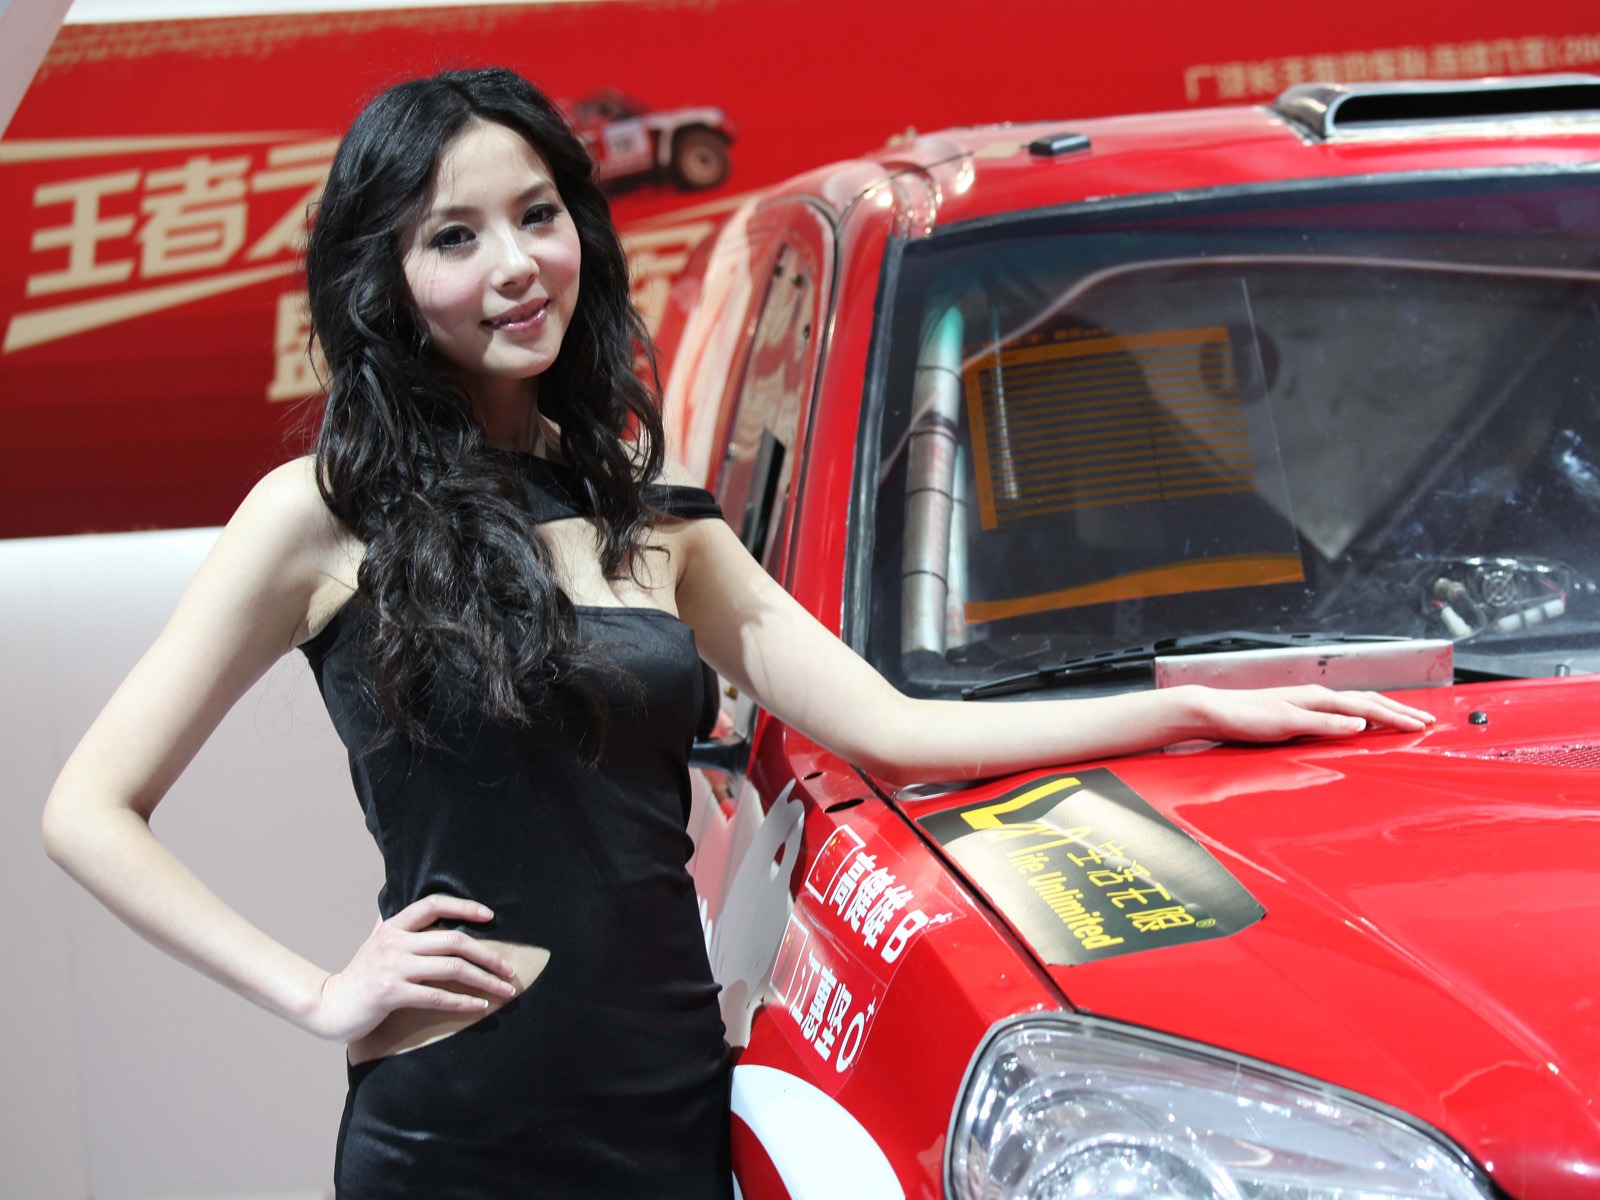 2010 Beijing International Auto Show beauty (1) (the wind chasing the clouds works) #32 - 1600x1200